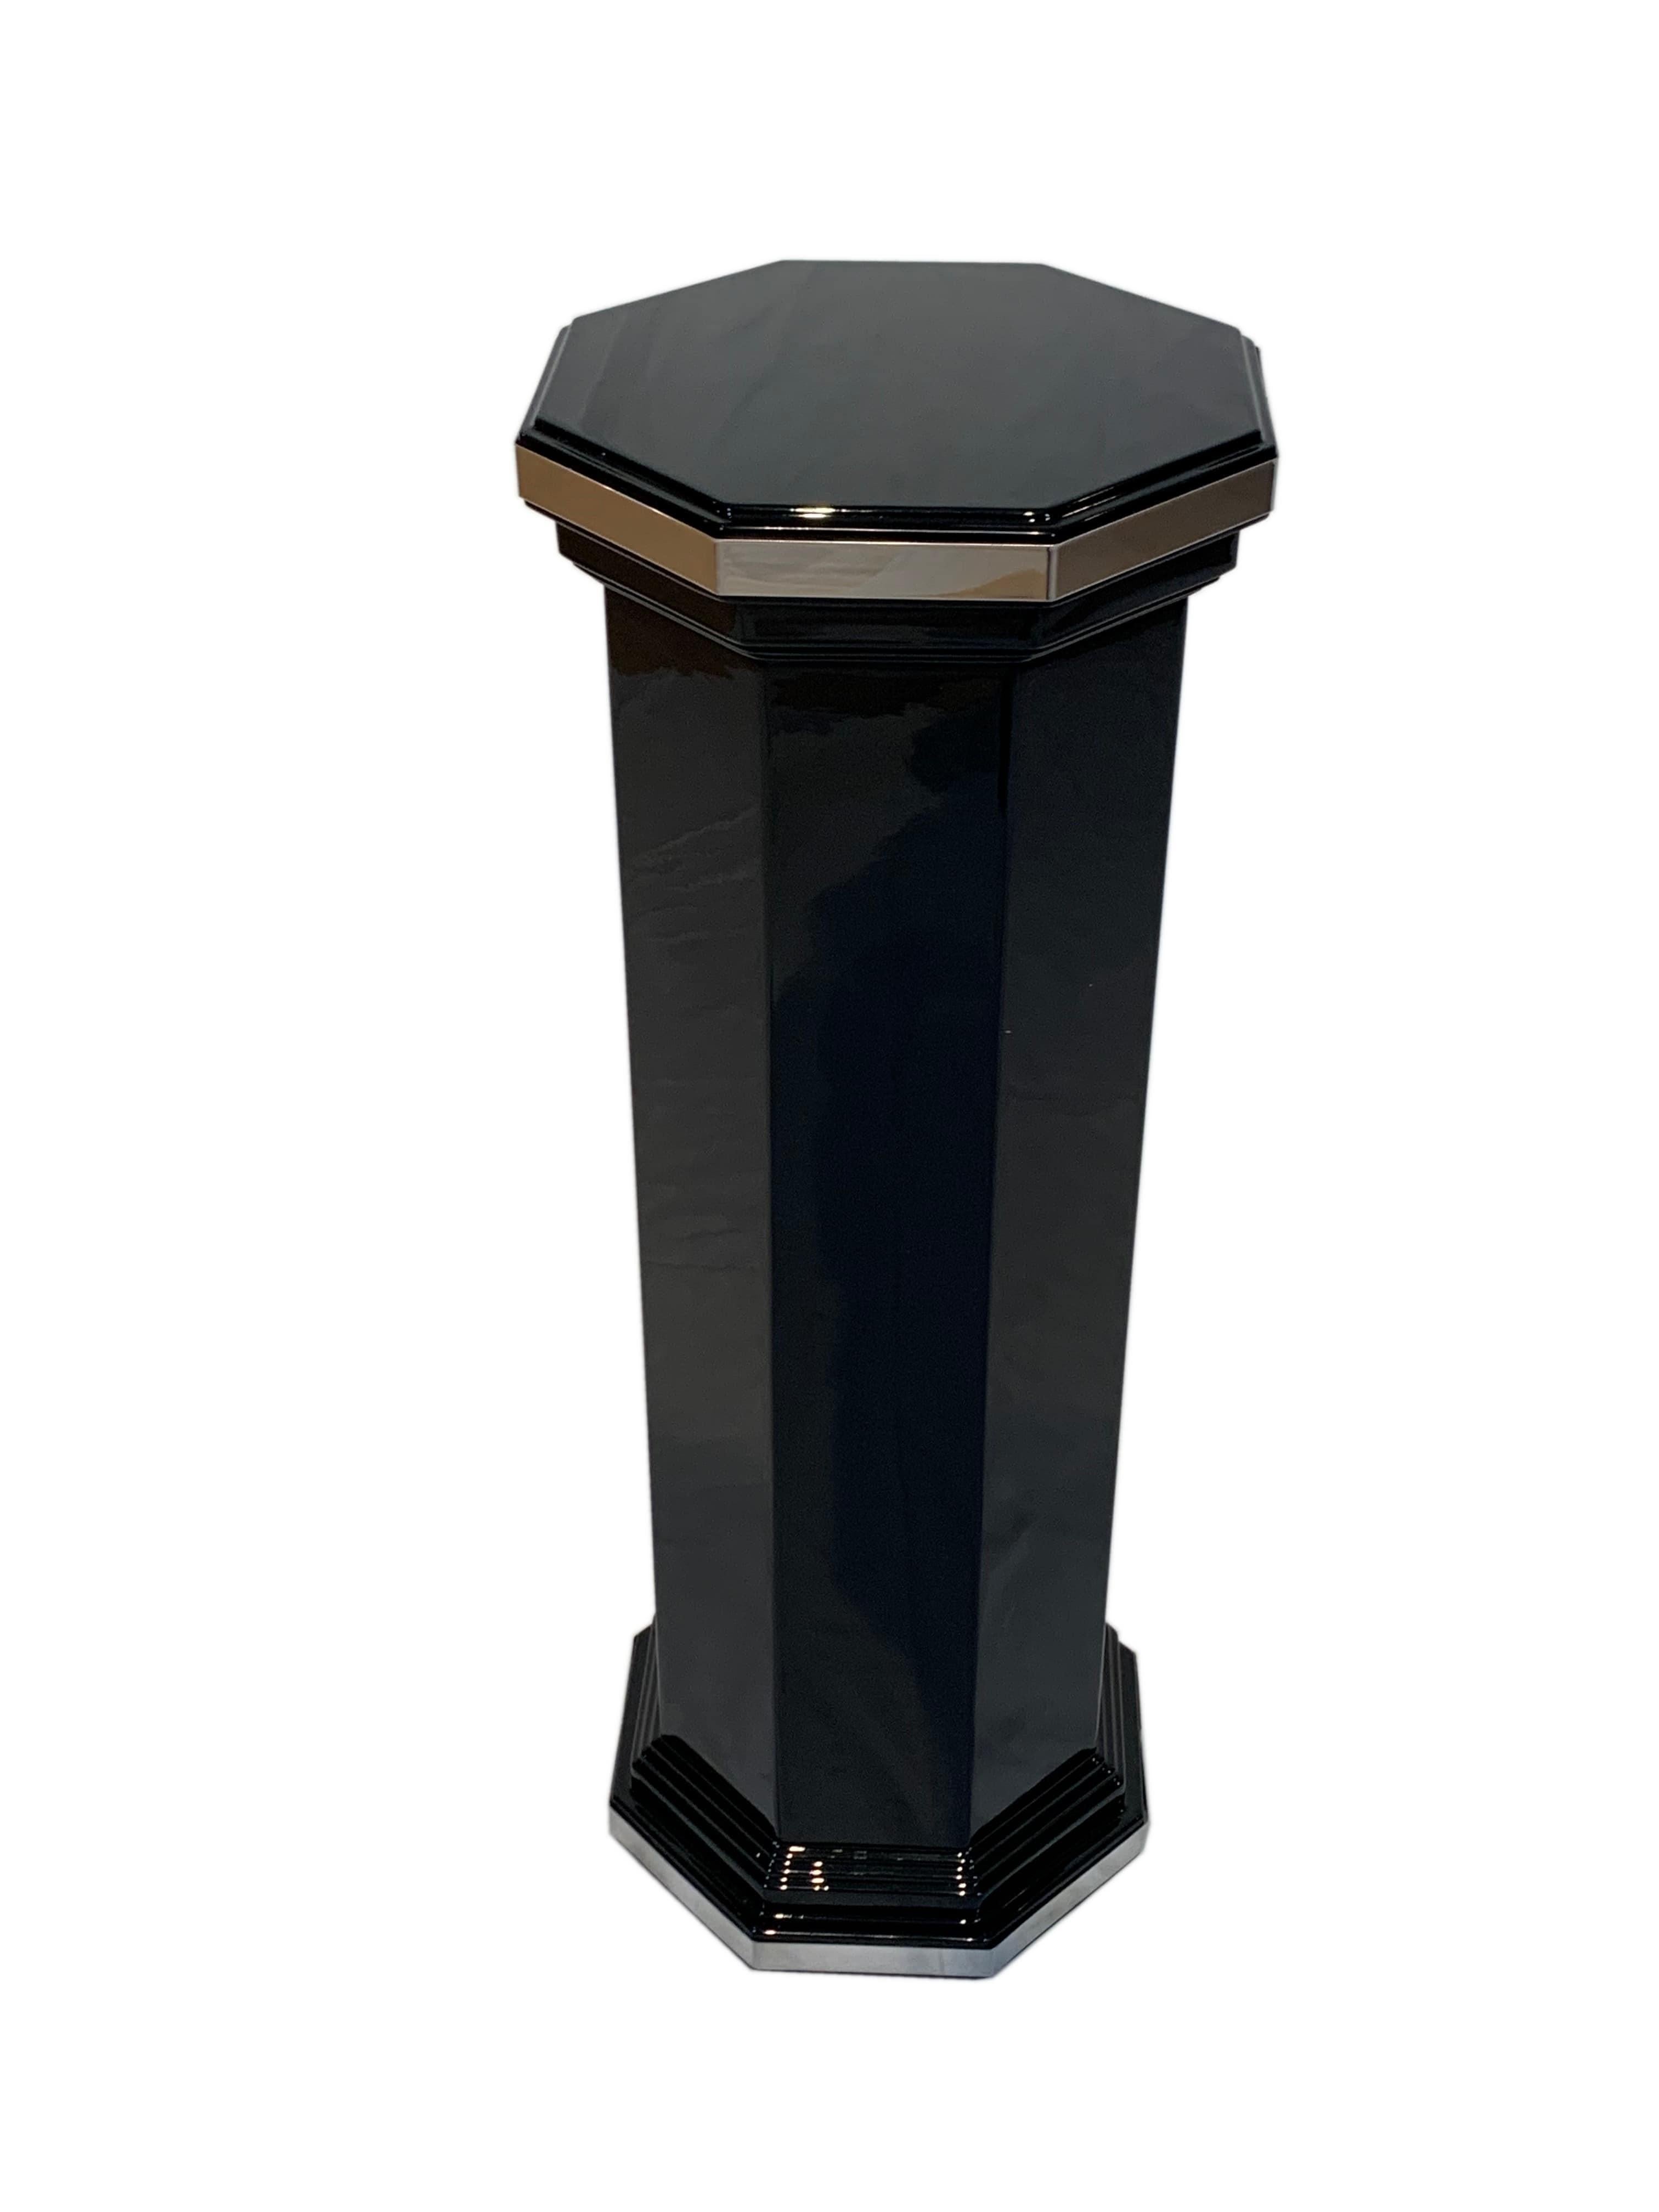 Elegant octagonal Art Deco column / pedestal from France, circa 1930

Black lacquered and high-gloss polished heavy hardwood. Finely stepped base and capital.
Around the top and bottom a polished chrome-colored stainless steel decorative